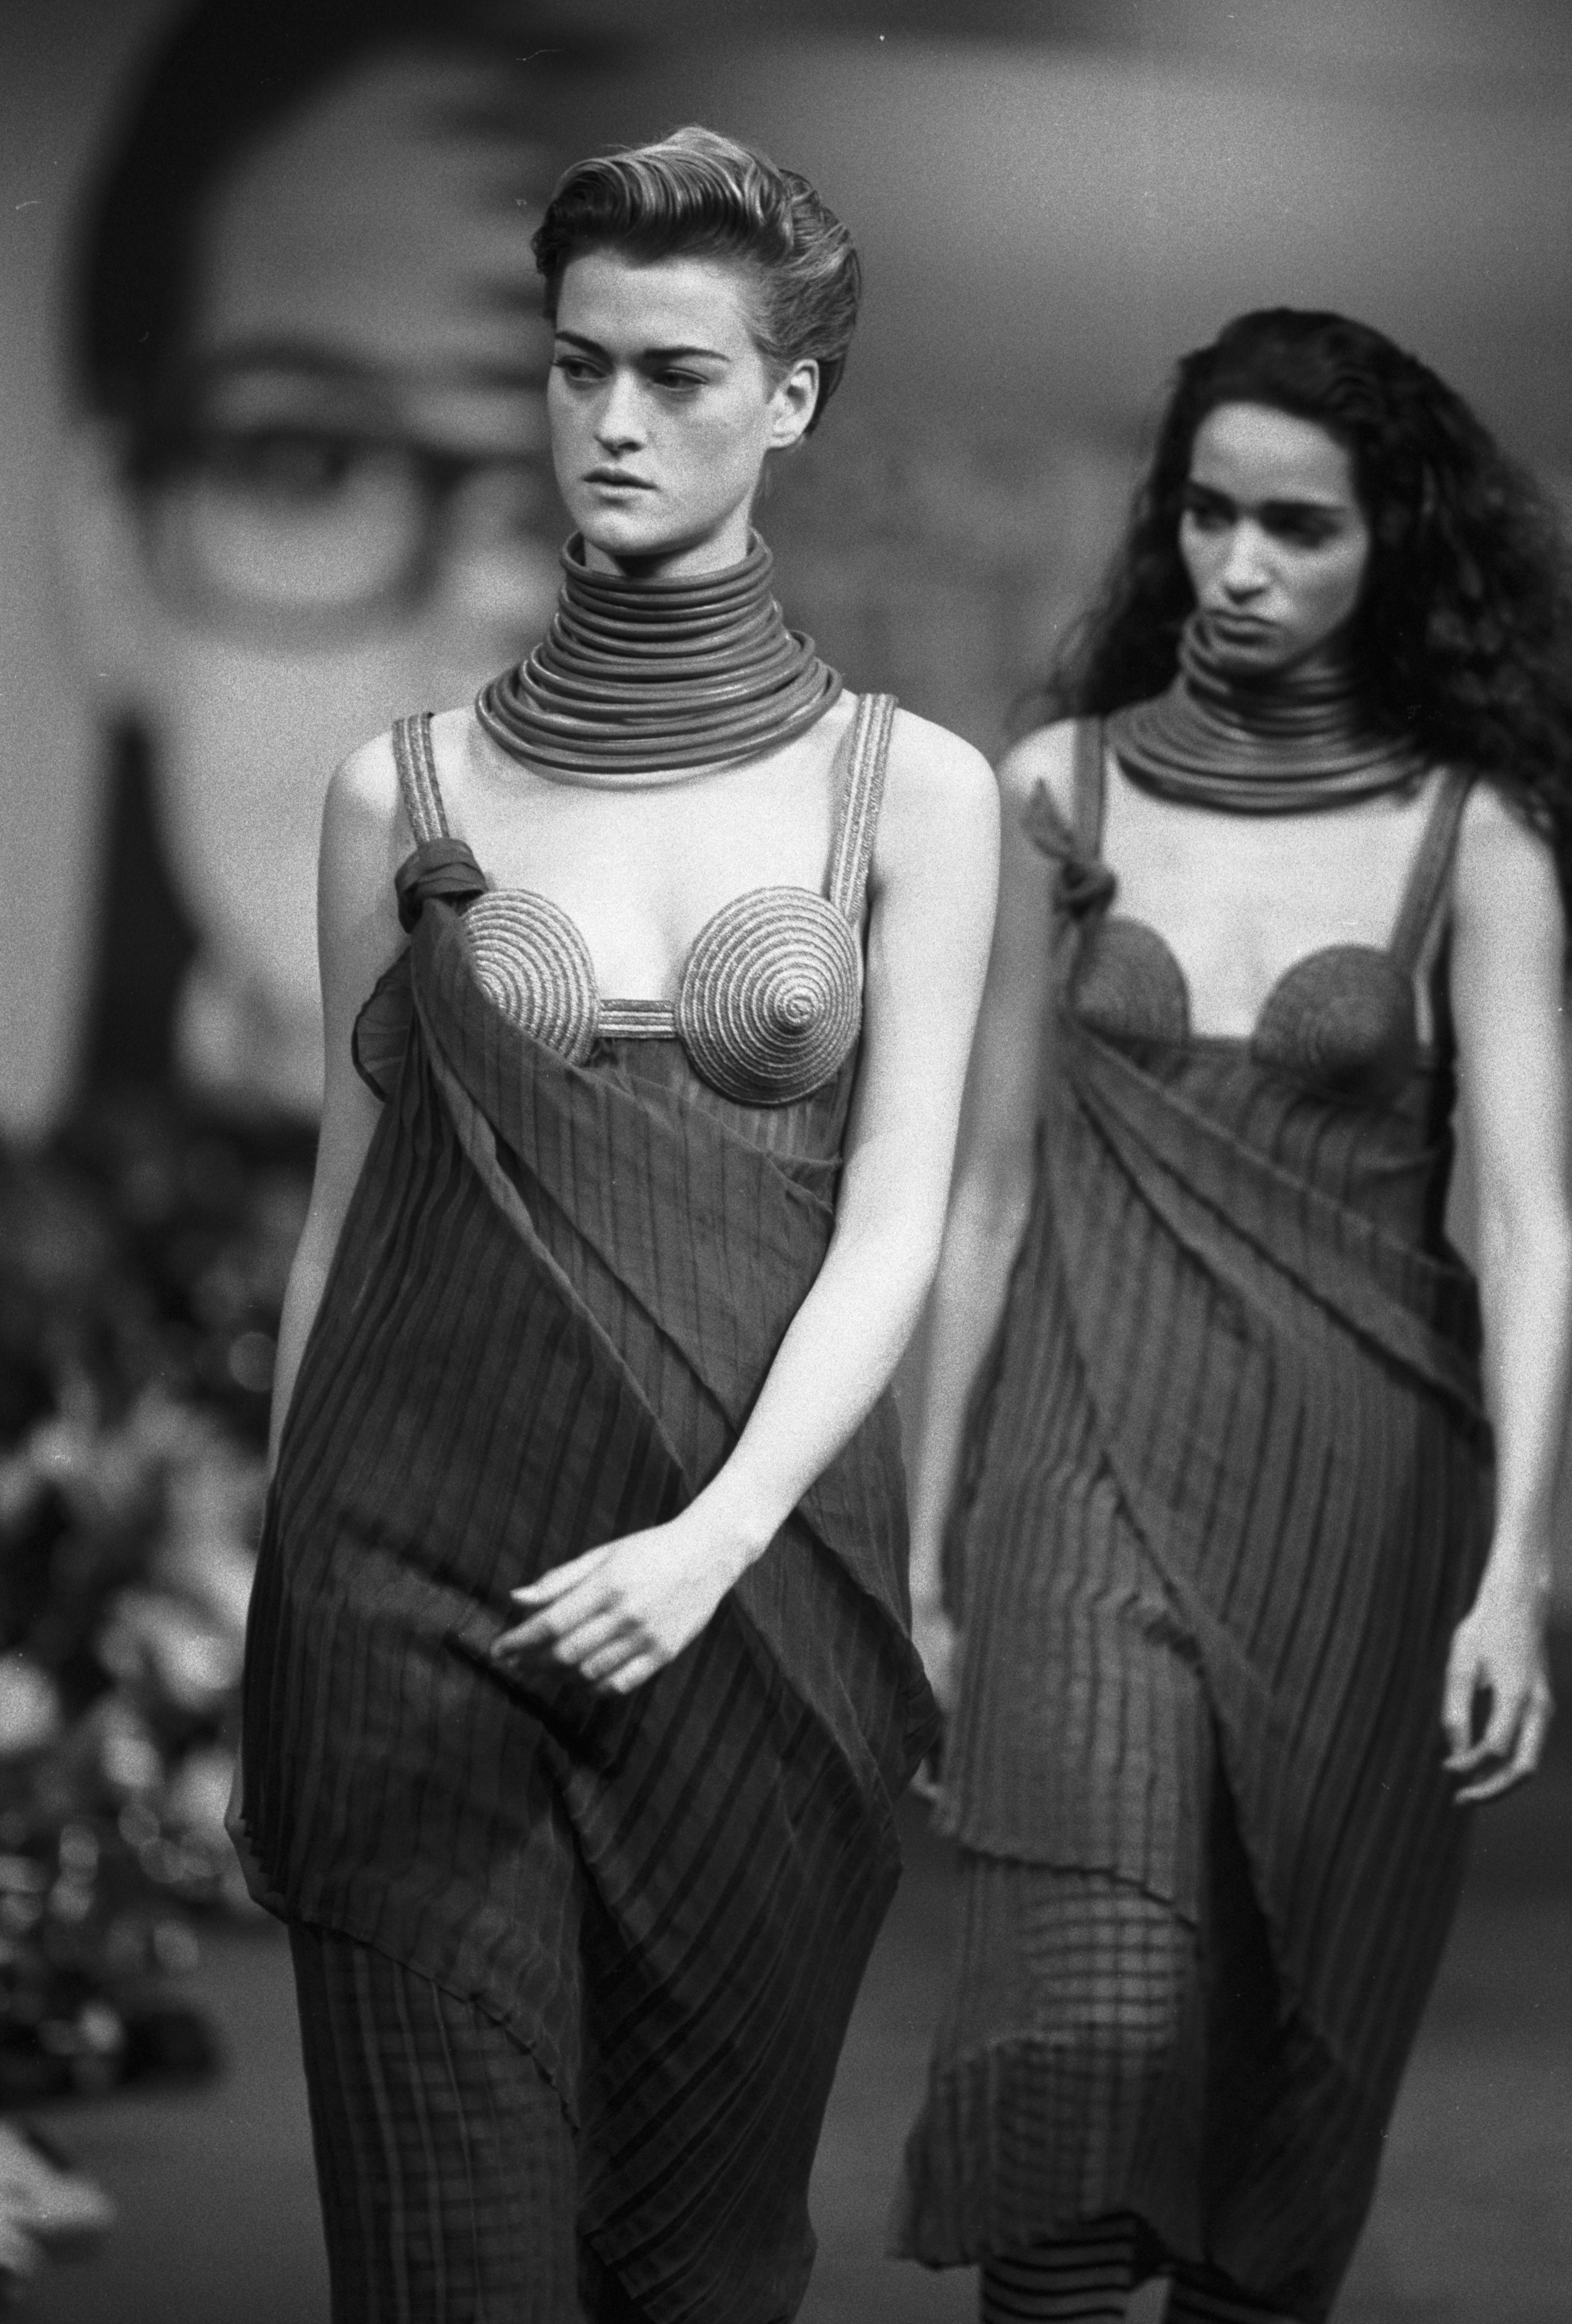 The rarest Jean Paul Gaultier bondage cone-style bra with cutout detailing  from the spring 1993 runway collection. Swipe and tap to shop